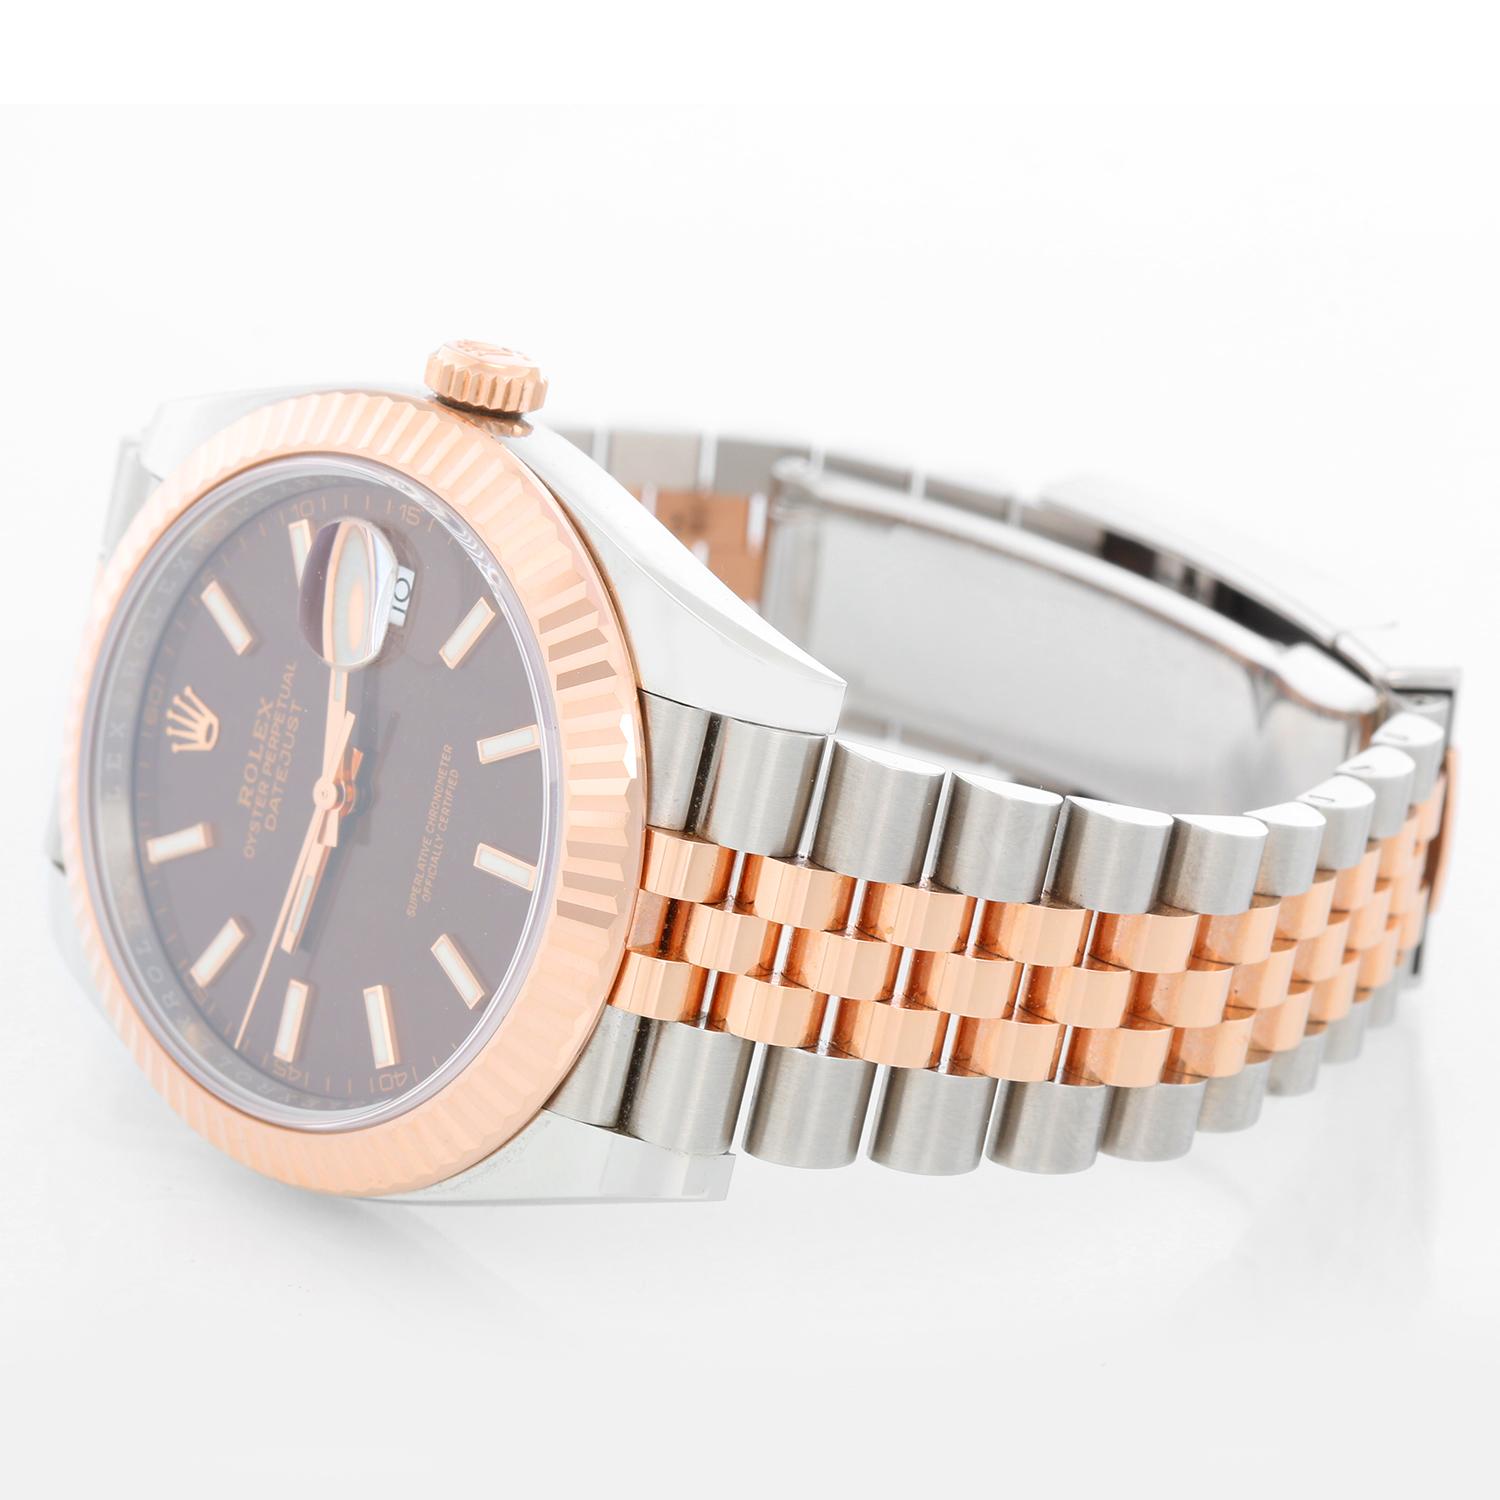 Rolex Datejust II  Men's 2-Tone Steel & Rose Gold 41mm Watch 126331 - Automatic winding, Quickset, sapphire crystal. Stainless steel case with 18k rose gold fluted bezel  (41mm diameter). Chocolate dial. Stainless steel and 18k rose gold Jubilee